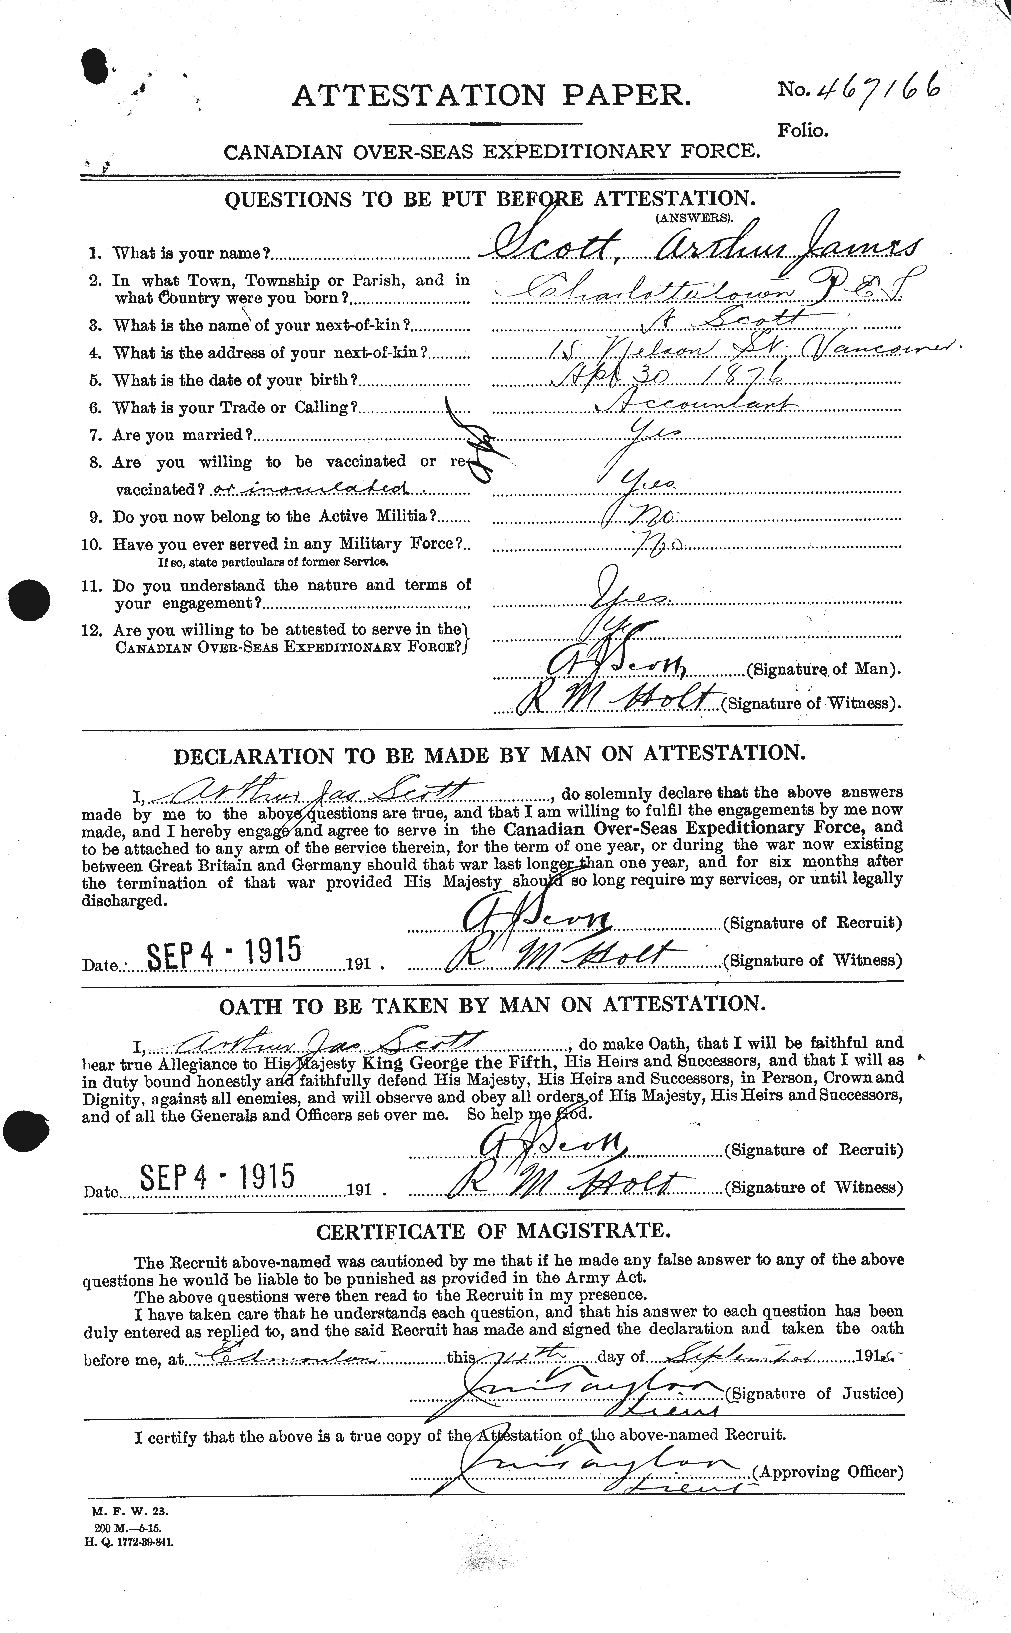 Personnel Records of the First World War - CEF 086234a